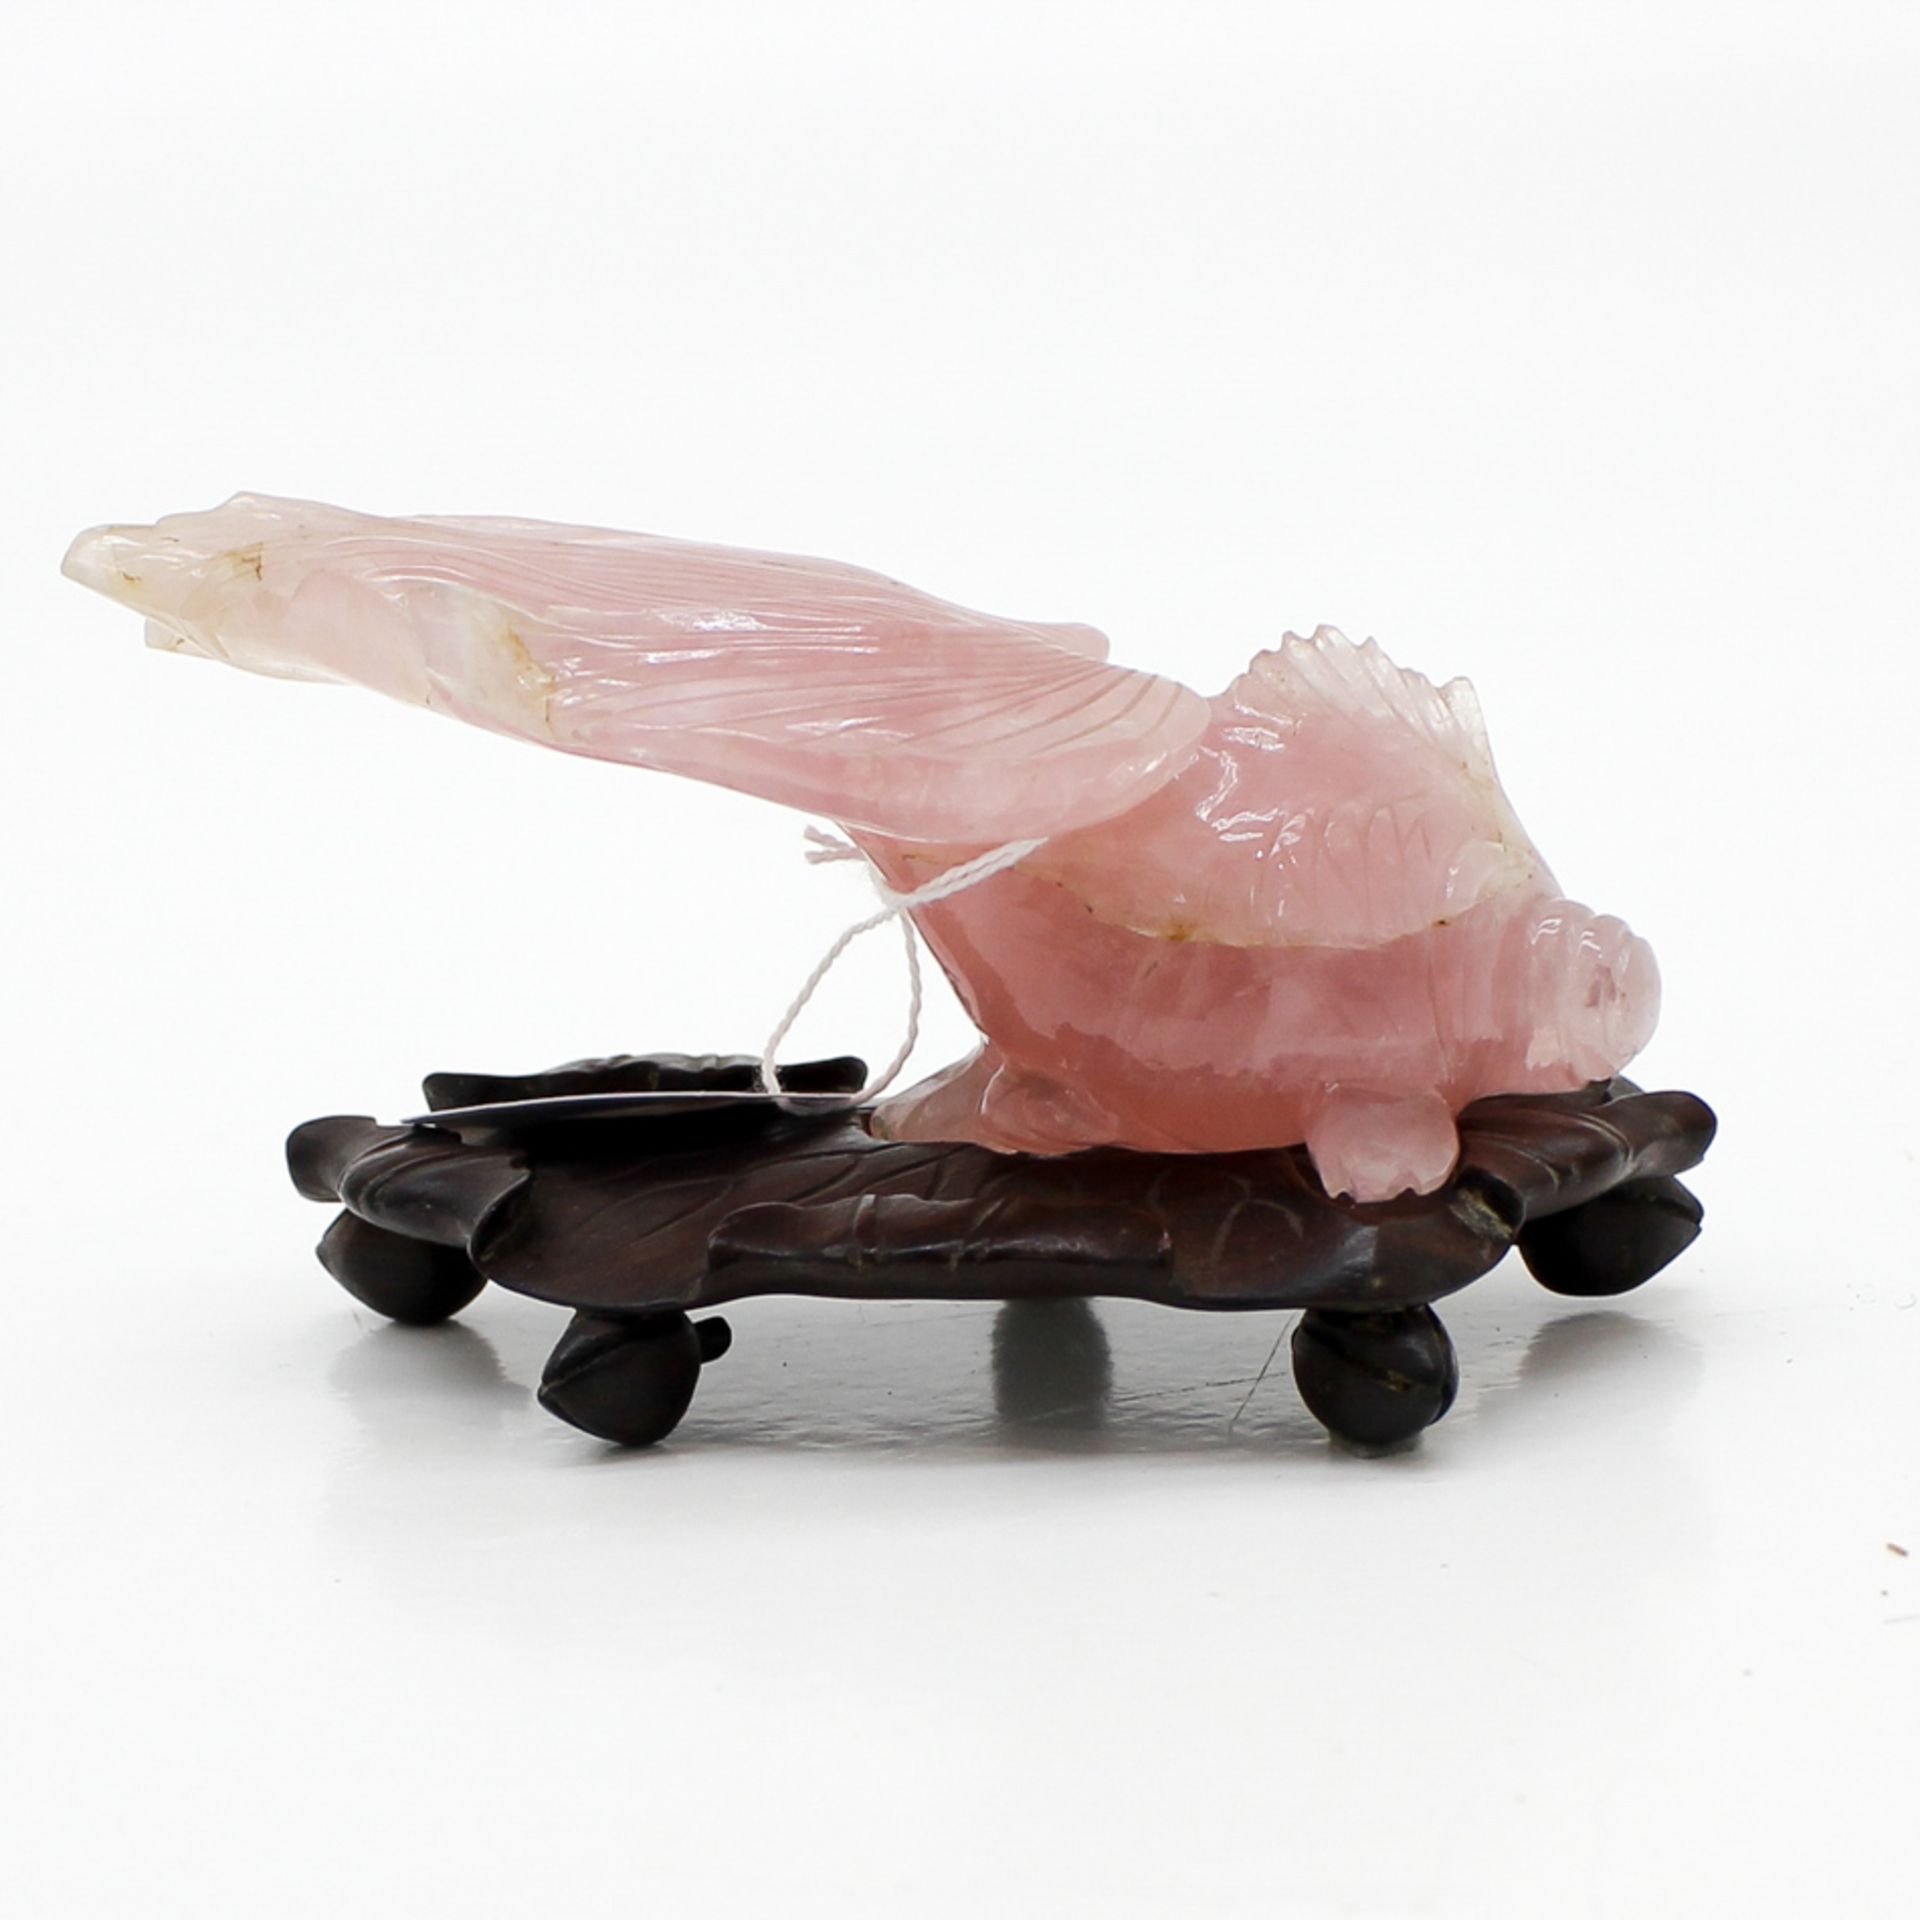 Carved Rose Quartz Chinese Koi Fish On wooden base, small chips on fin of Koi, 7 x 13 x 7 cm. - Bild 3 aus 6